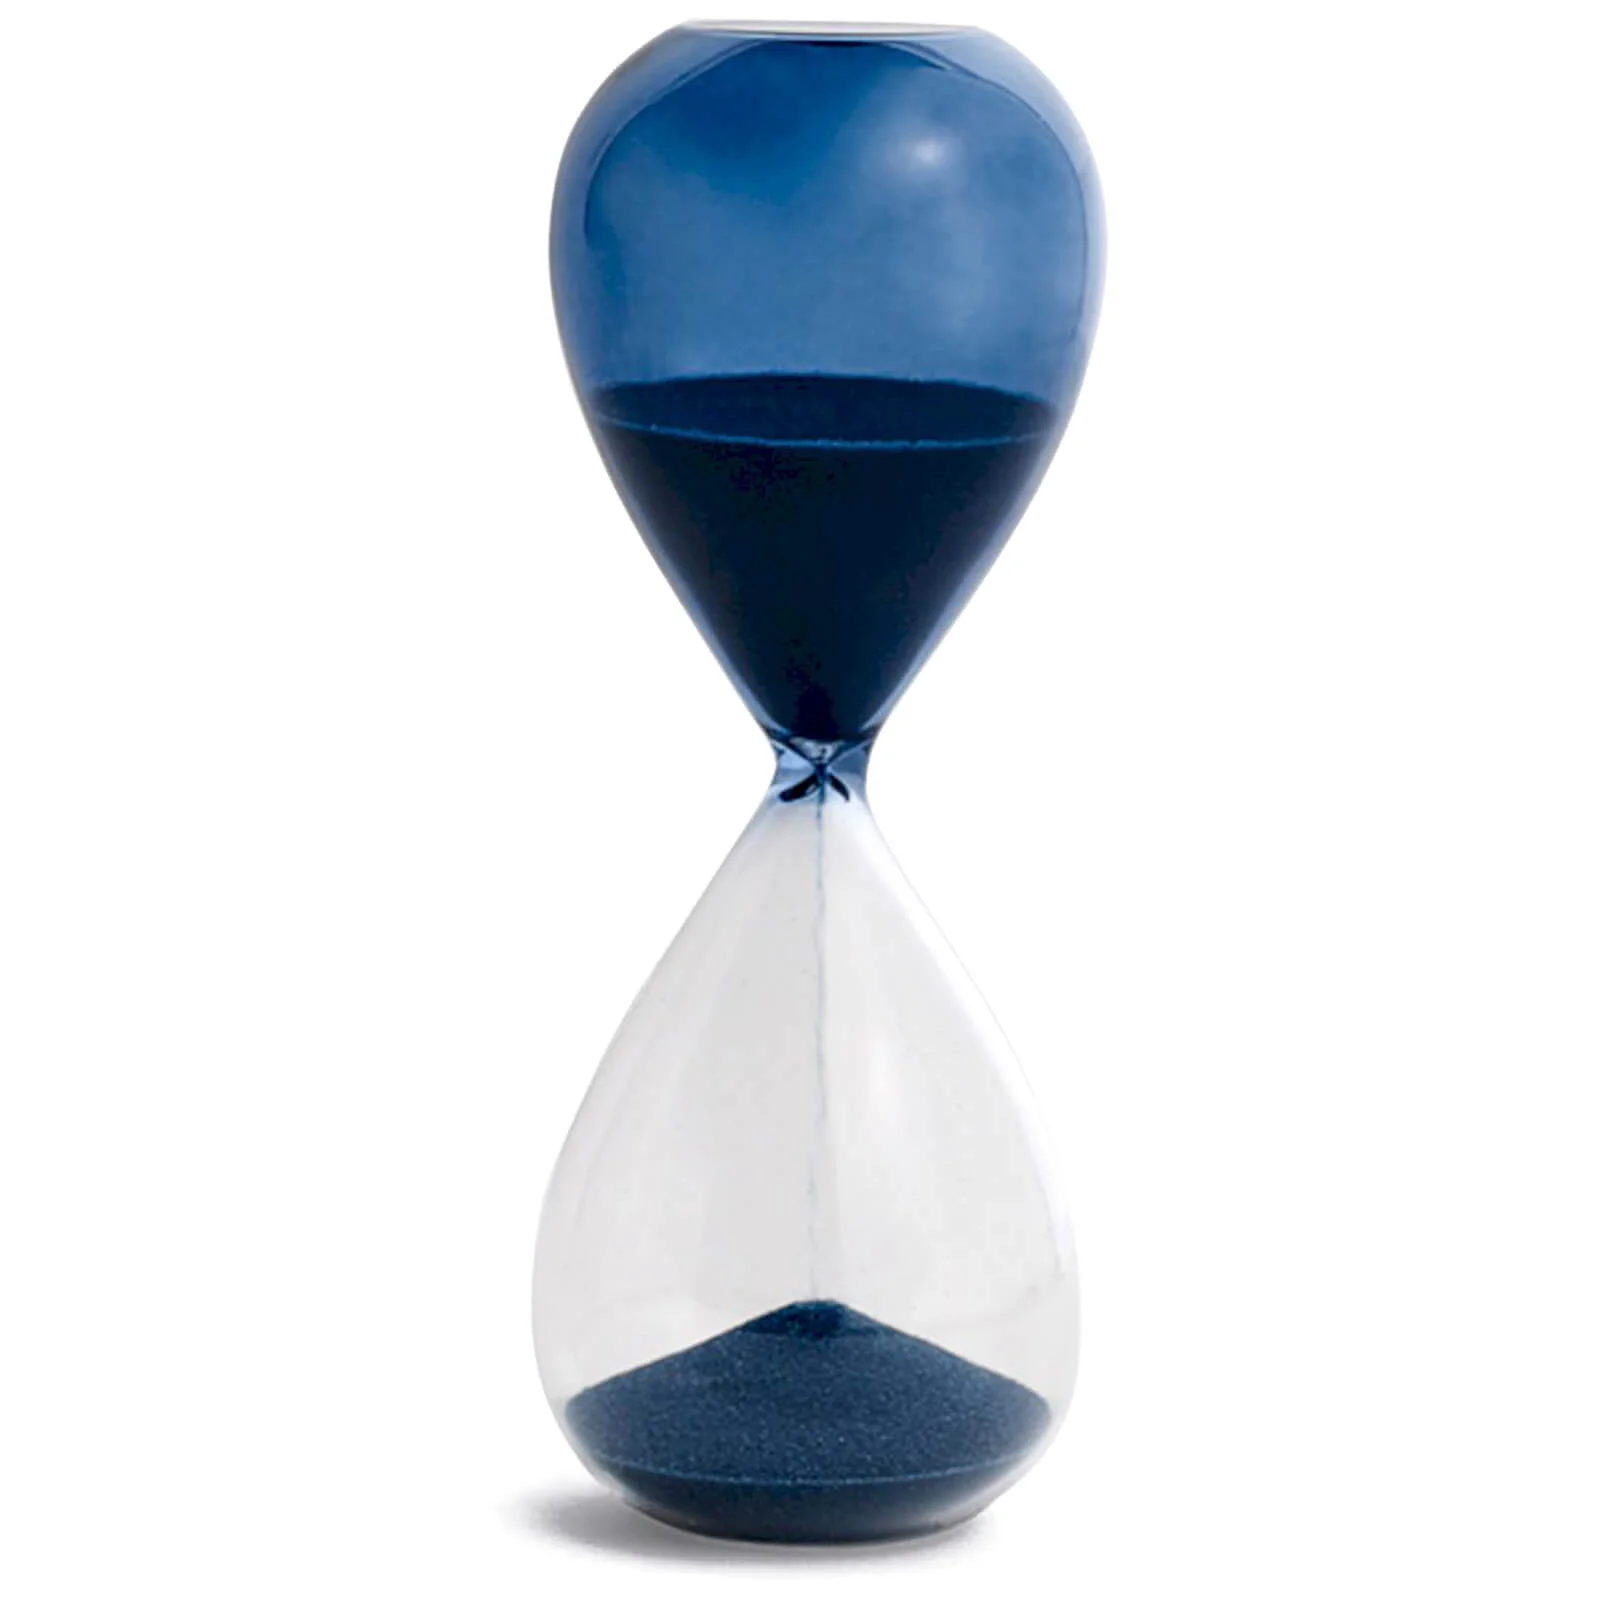 HAY Time Hourglass - 15 Minutes - Petrol Blue Image 1